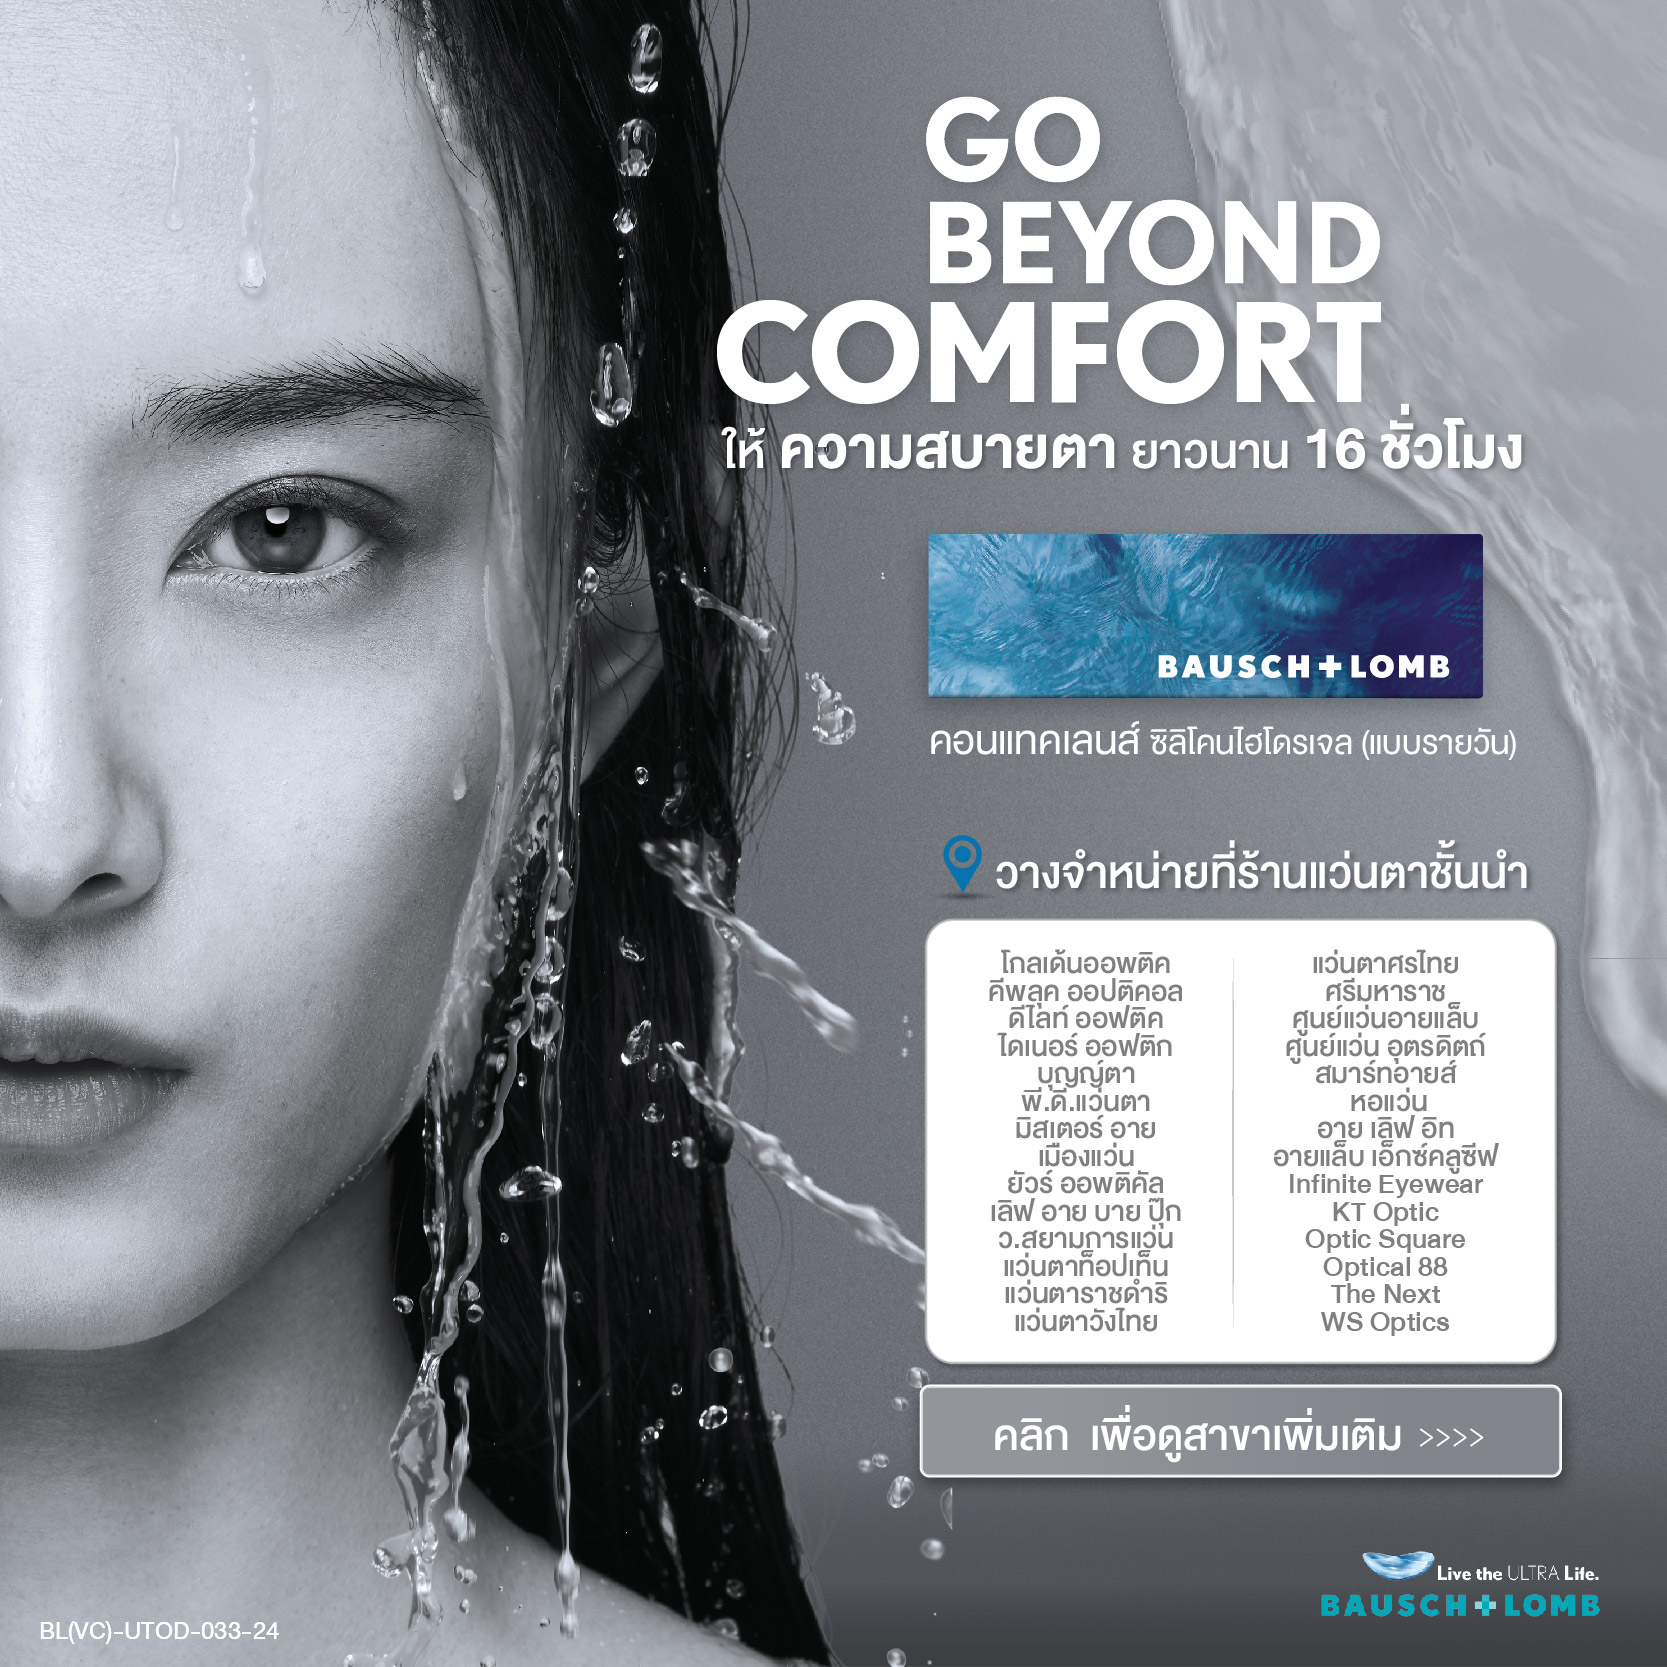 contact-lenses-silicone-hydrogel-go-beyond-comfort